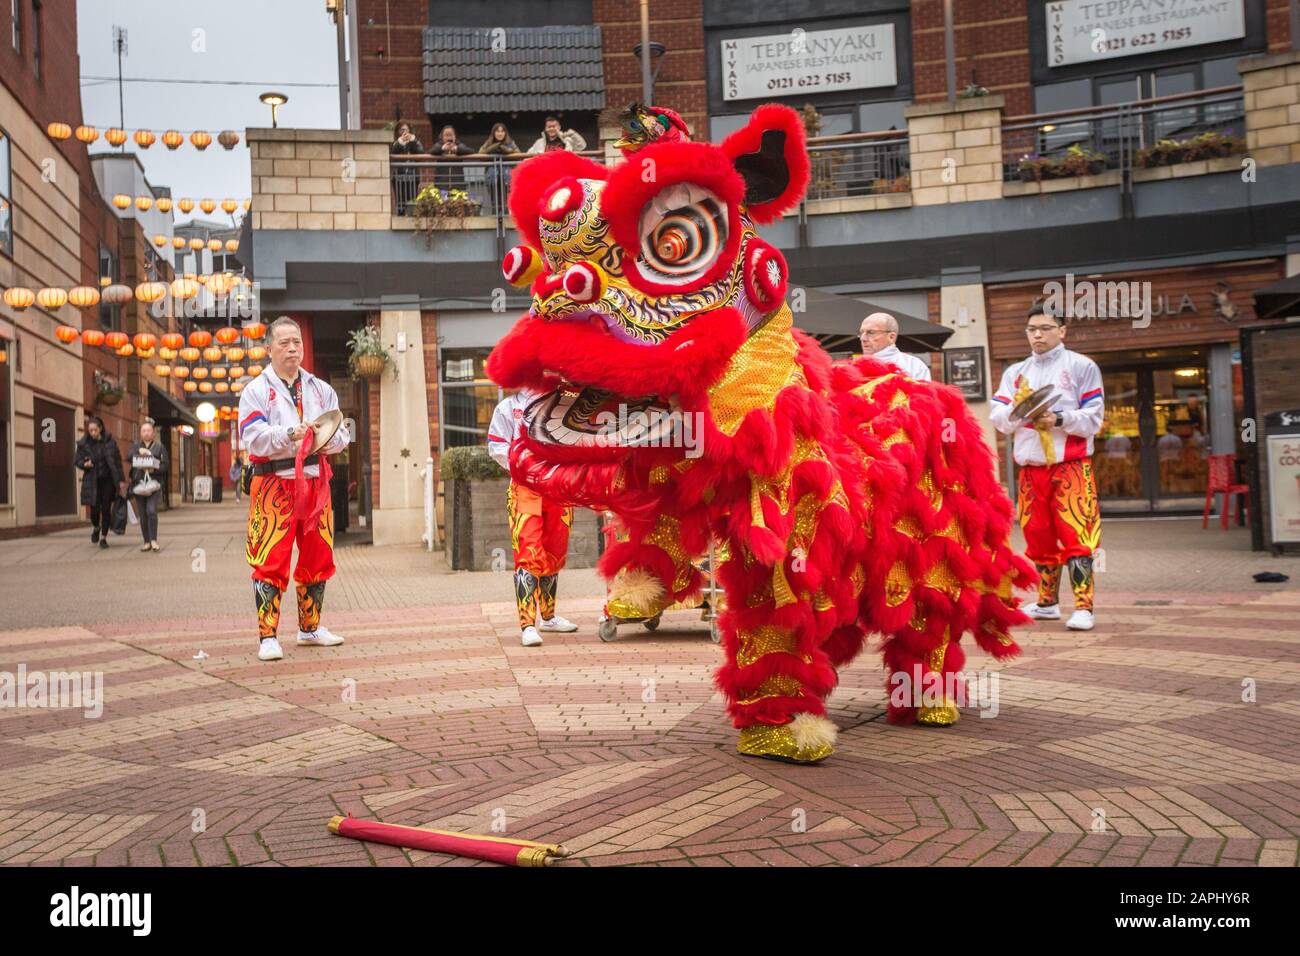 Birmingham, UK. 23rd Jan, 2020. Preparations for the weekend's celebration of the Chinese New Year begin in Birmingham's Arcadian centre, in the heart of the city's Chinese quarter. This year will be the Year of the Rat - which is a sign of wealth and surplus in Chinese culture. Credit: Peter Lopeman/Alamy Live News Stock Photo